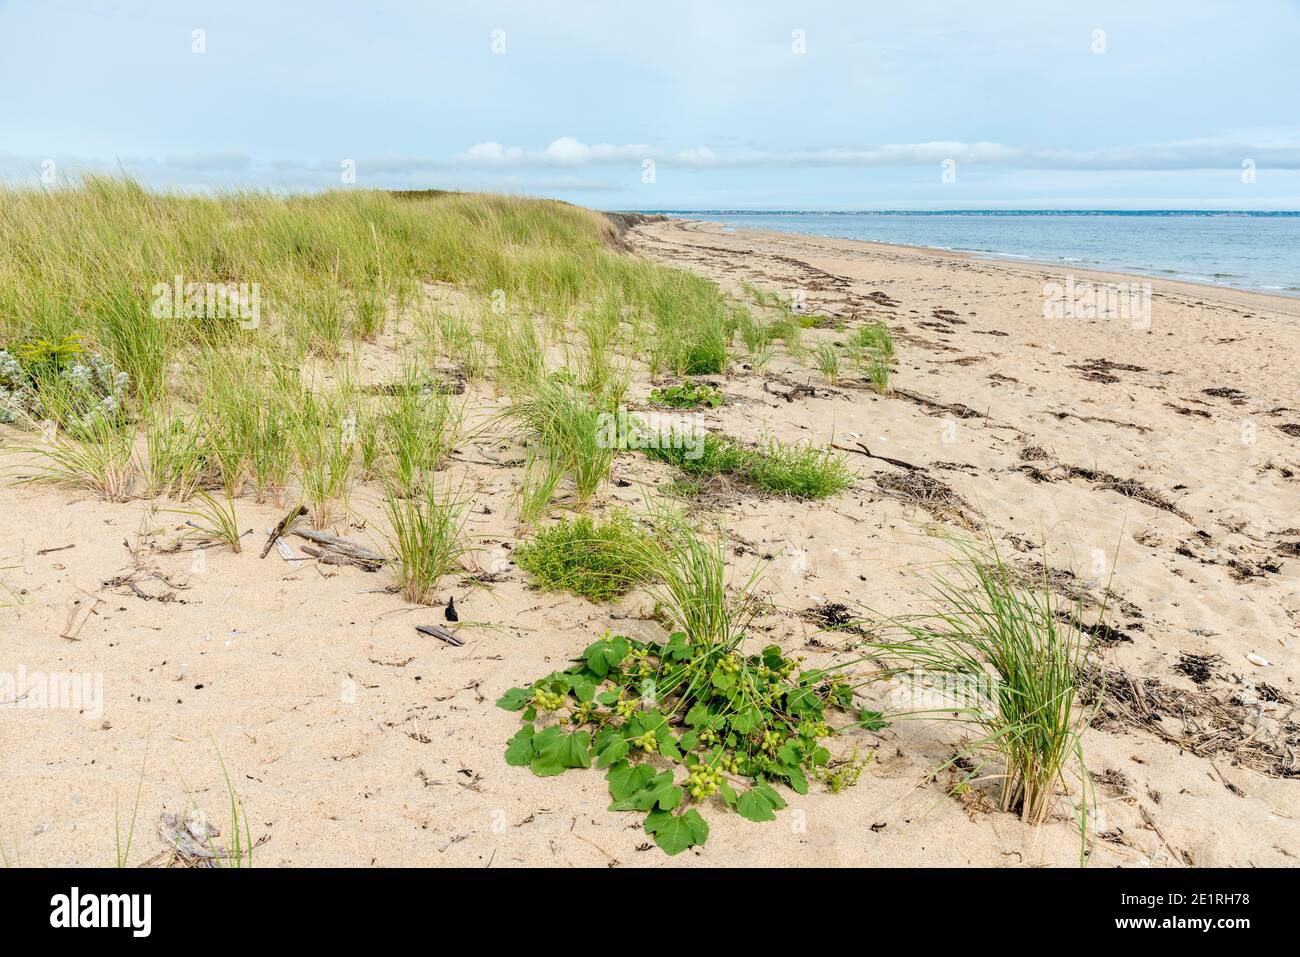 View of the the beach and natural grasses in Provincetown, Massachusetts along the Atlantic Ocean. Stock Photo